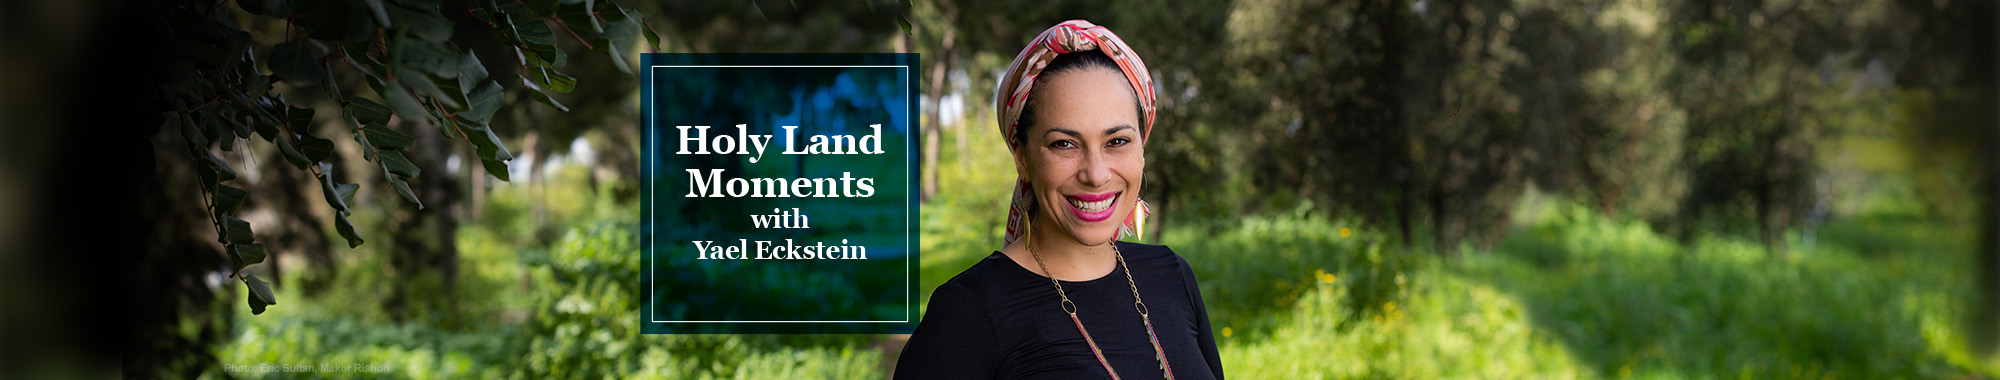 Holy Land Moments with Yael Eckstein smiling